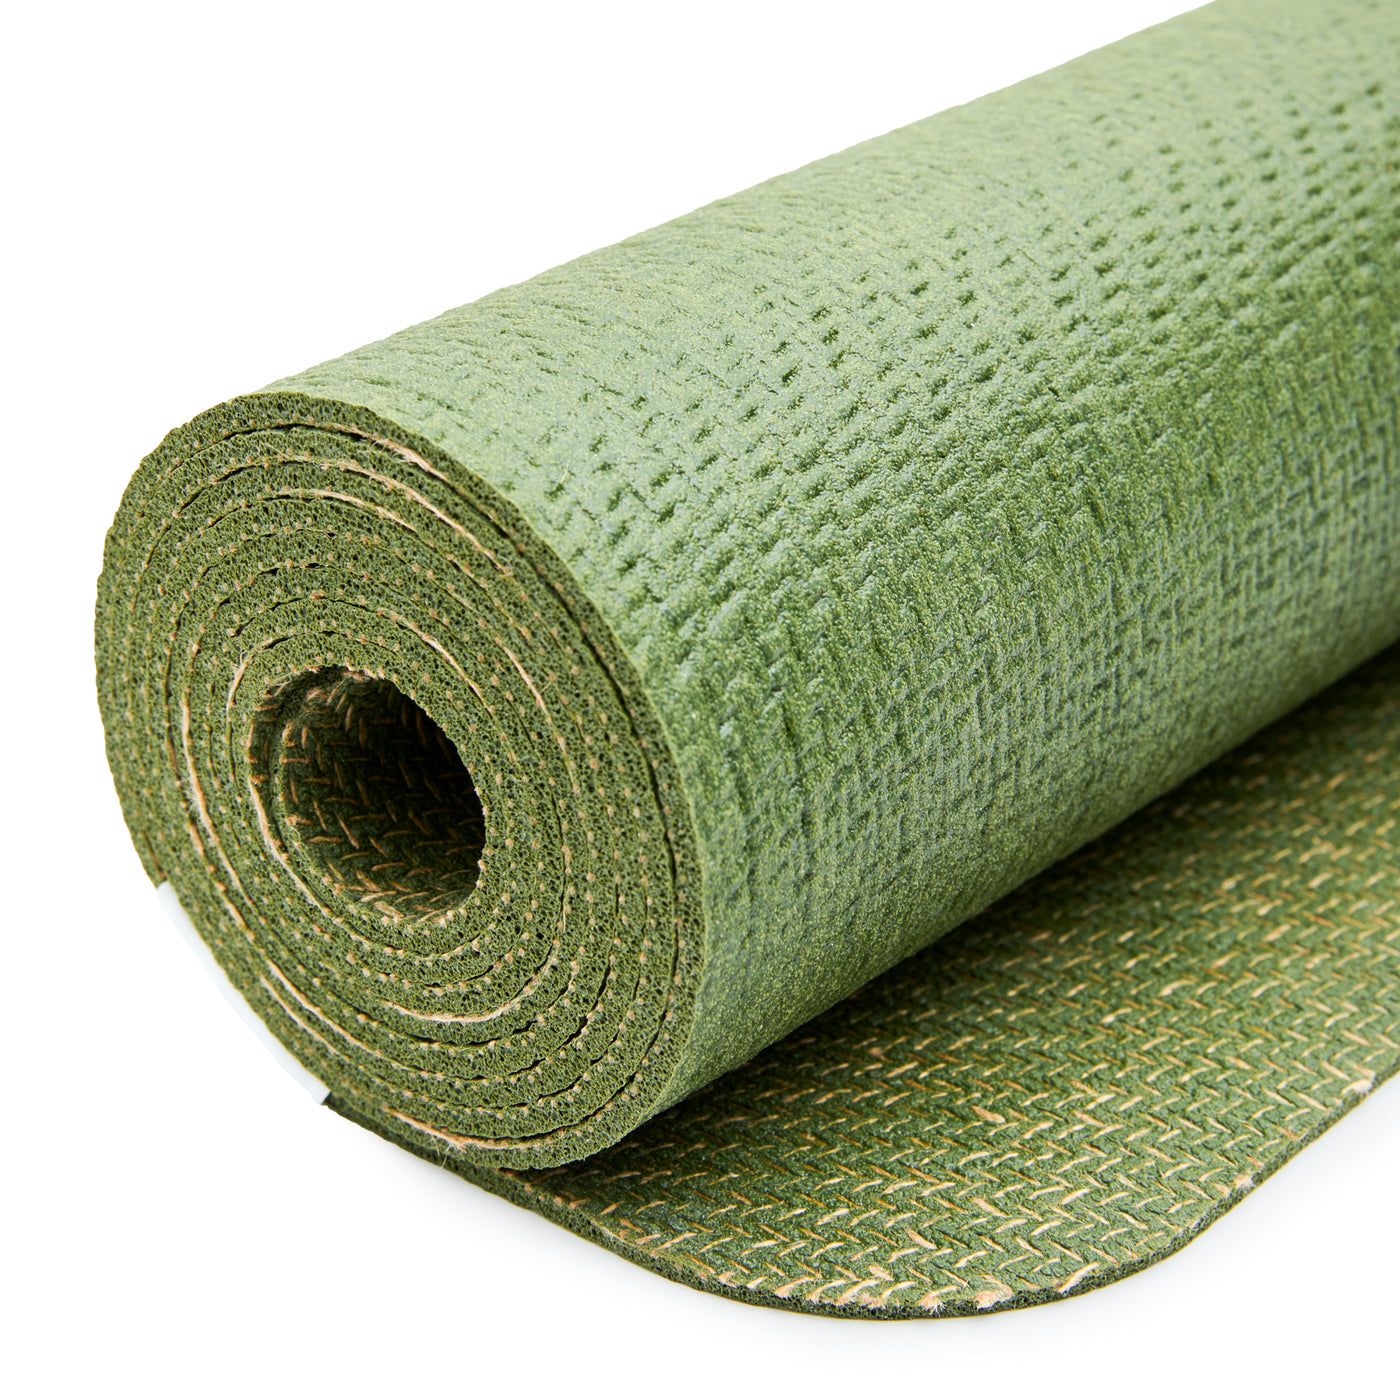 NEW MYGA Jute Yoga Mat High Performance Natural Fiber Eco-Friendly Indoor  Or Out